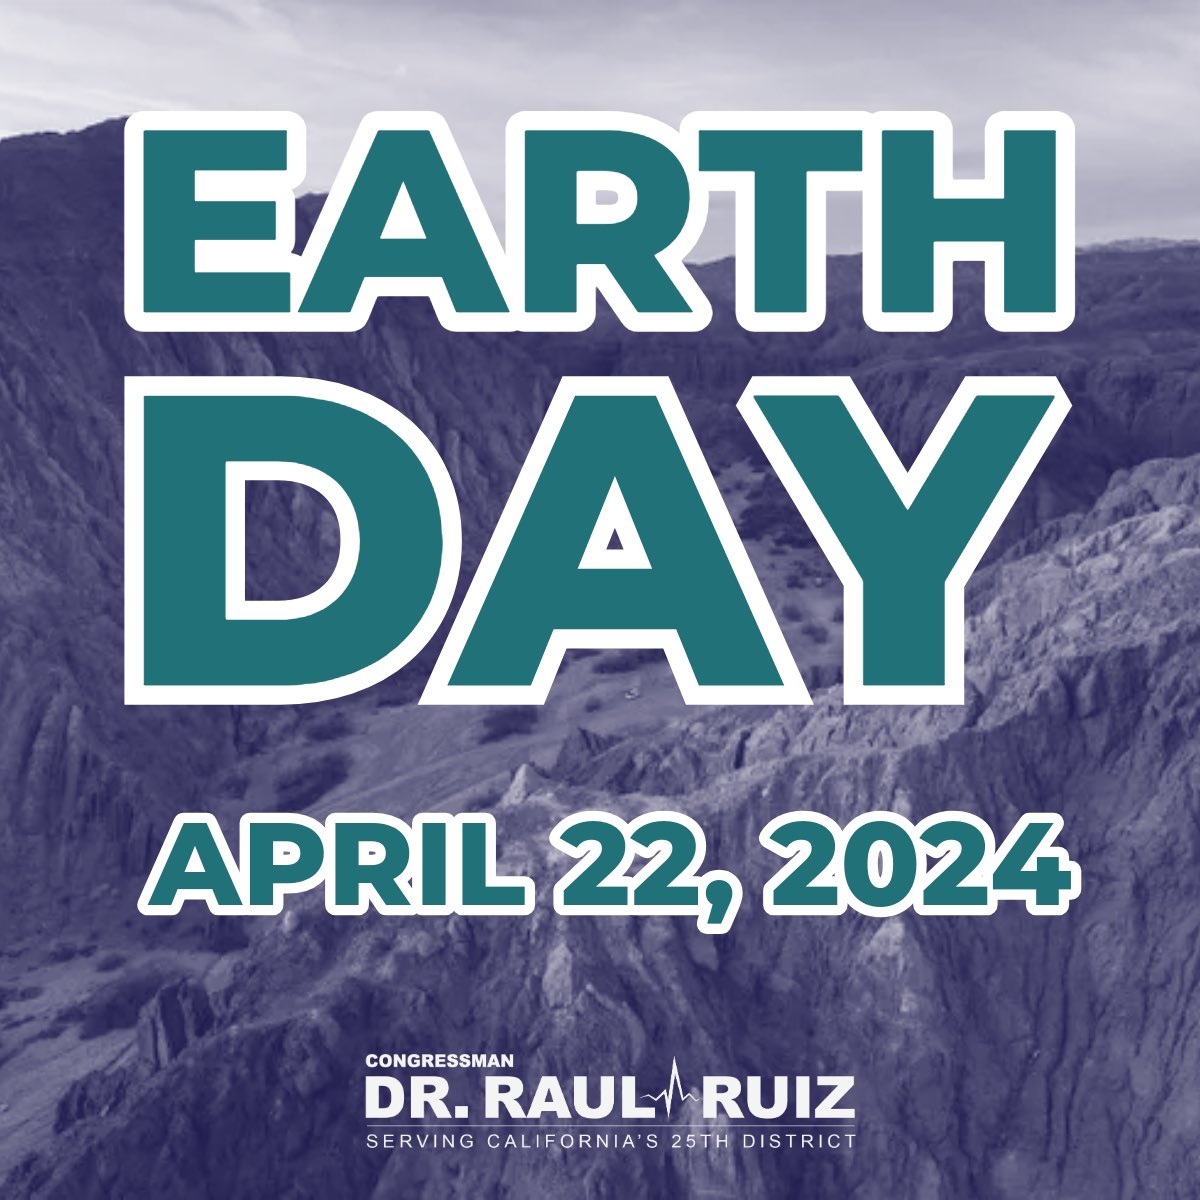 Today, on #EarthDay, we reaffirm our dedication to the environment.   This year, I am championing the creation of the Chuckwalla National Monument in the California Desert, a testament to our commitment to preserving our natural treasures. #ChuckwallaNationalMonument